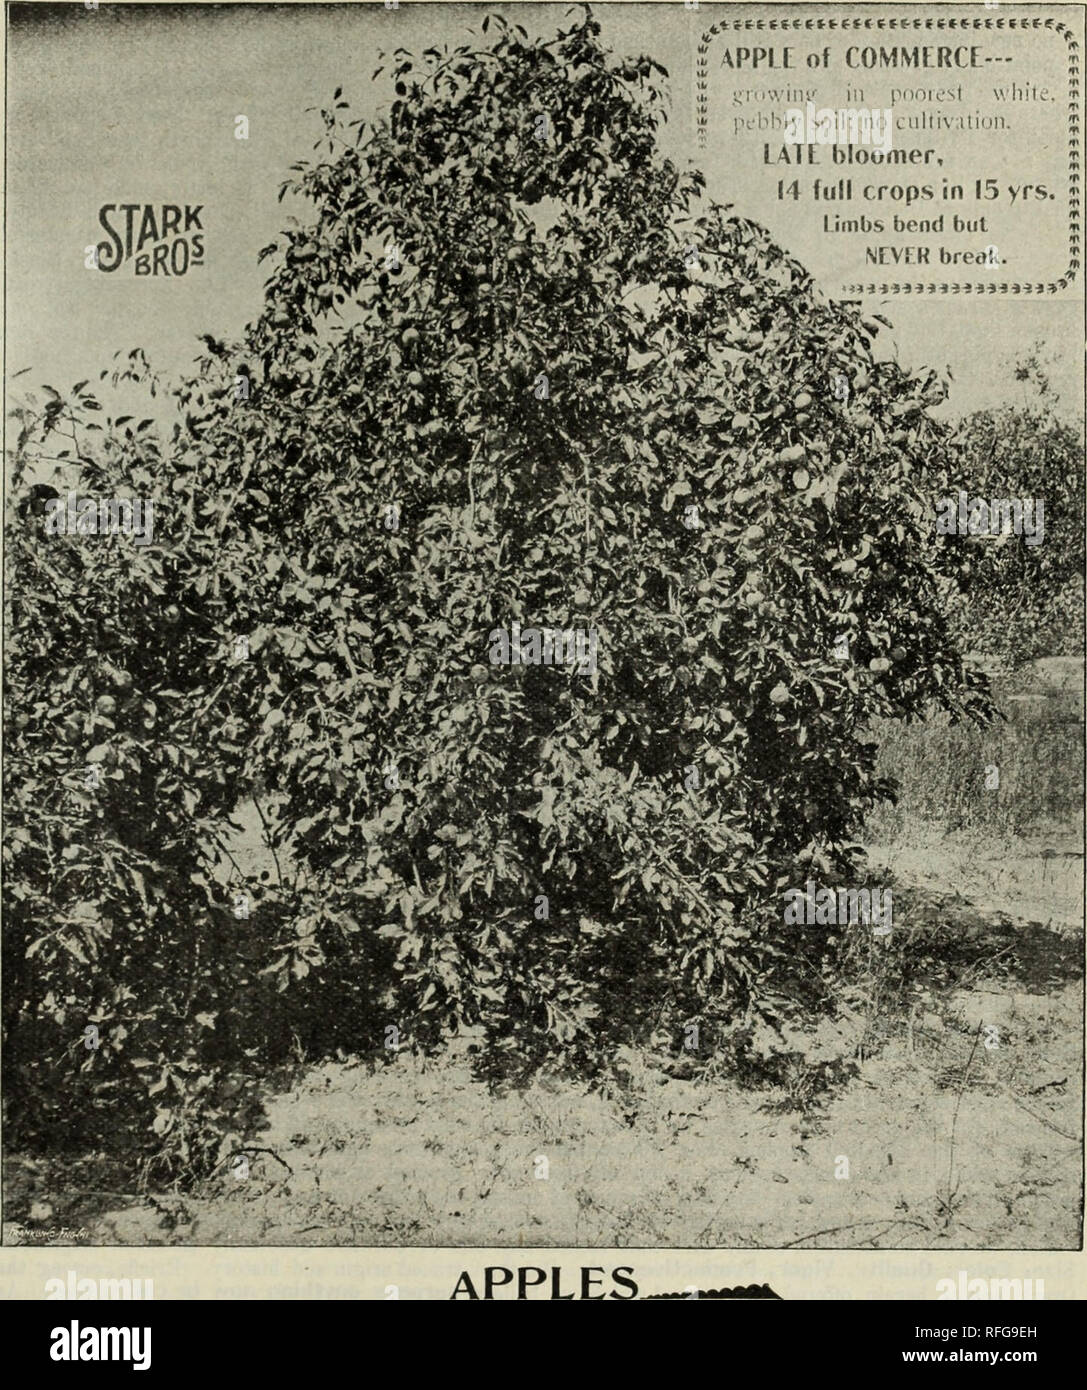 . Stark fruit book. Nursery stock Missouri Louisiana Catalogs; Fruit trees Catalogs; Fruit Catalogs; Flowering shrubs Catalogs. Alexander.-Thin bearer, blighter; less hardy, much less desirable, than Wealthy or Wolf River, market. N. III. Exp. St'n : Often inijKTfect, liable to rot. Though sht) y when in perfection, is of little value.—Prof. Burrill. Am. SummeP Pearmain.-Tender, juicy, but apt to scab, crack; Summer King is best of the season. F. CS. APPLE of COMMERCE (Trade Mark).-This finest of long keepers, with Black Ben Davis, Champion, Stayman Winesap, Delicious, Senator, together with Stock Photo